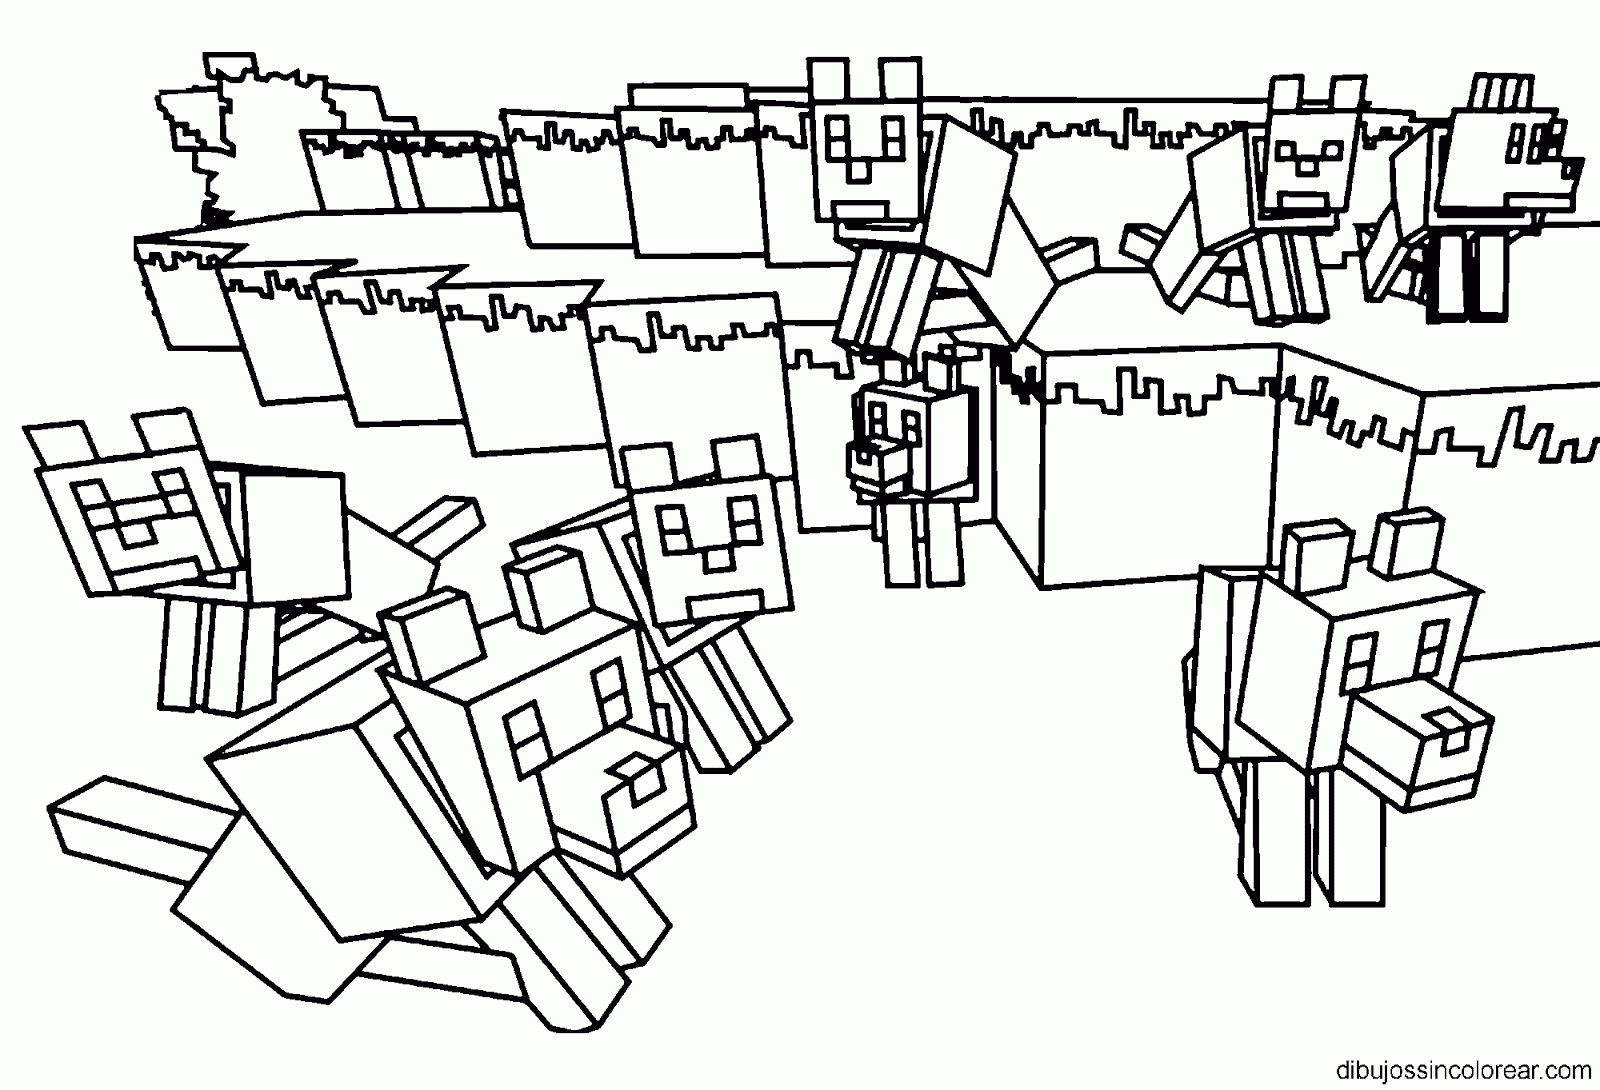 Minecraft Free Coloring Pages
 Dibujos Sin Colorear Dibujos de Minecraft para Colorear